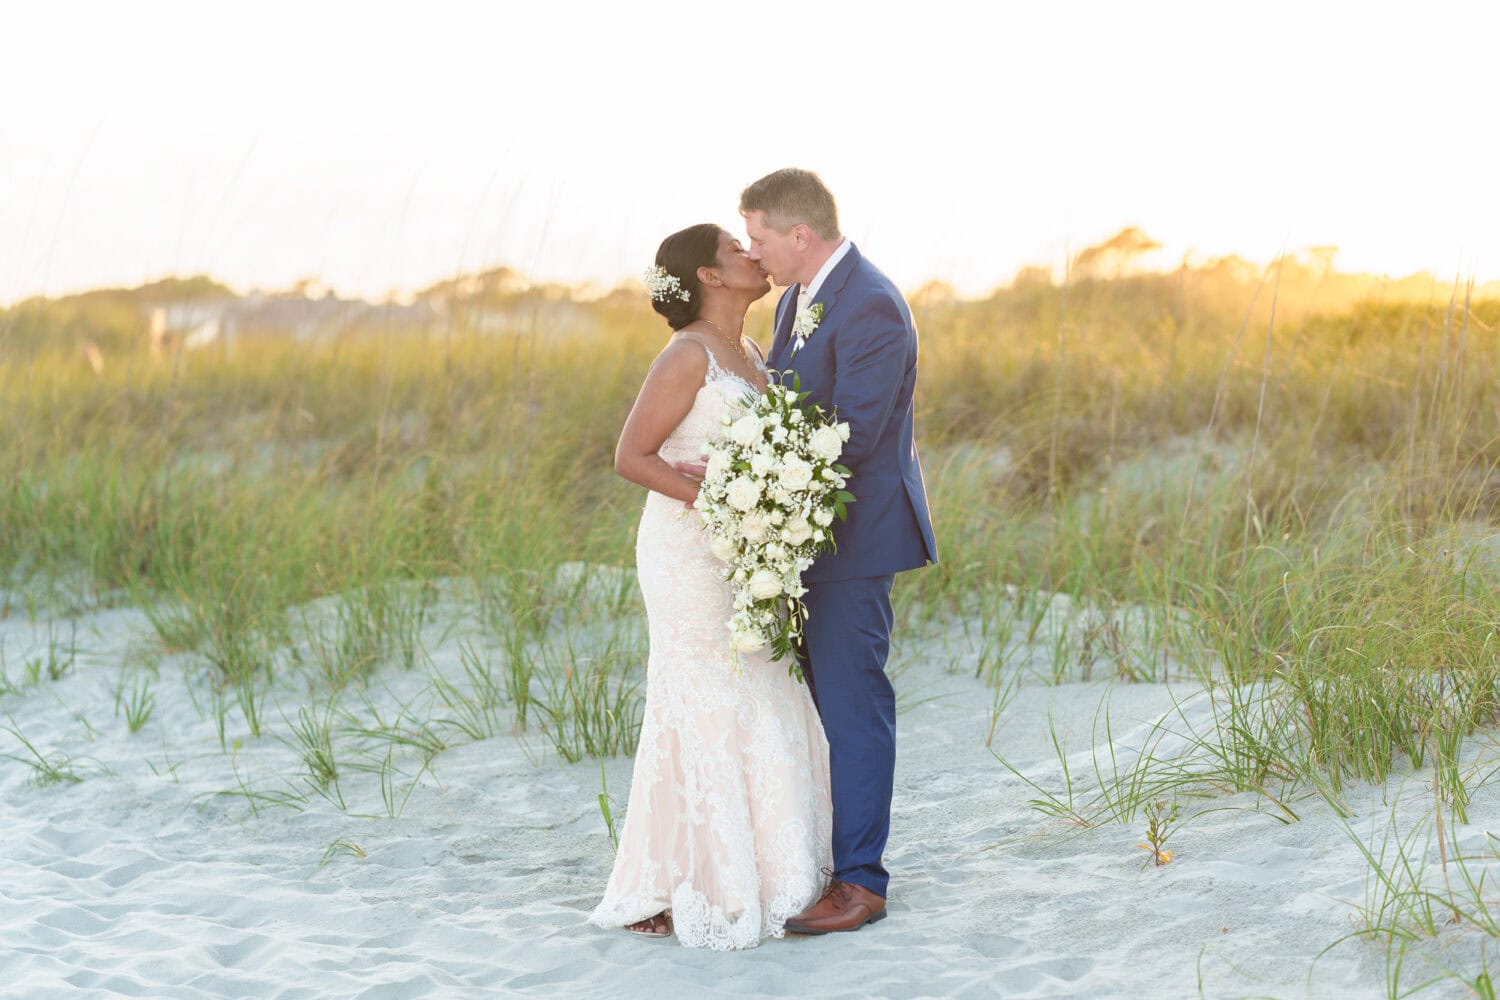 Sunset portraits in front of the sea oats and dunes - 21 Main Events